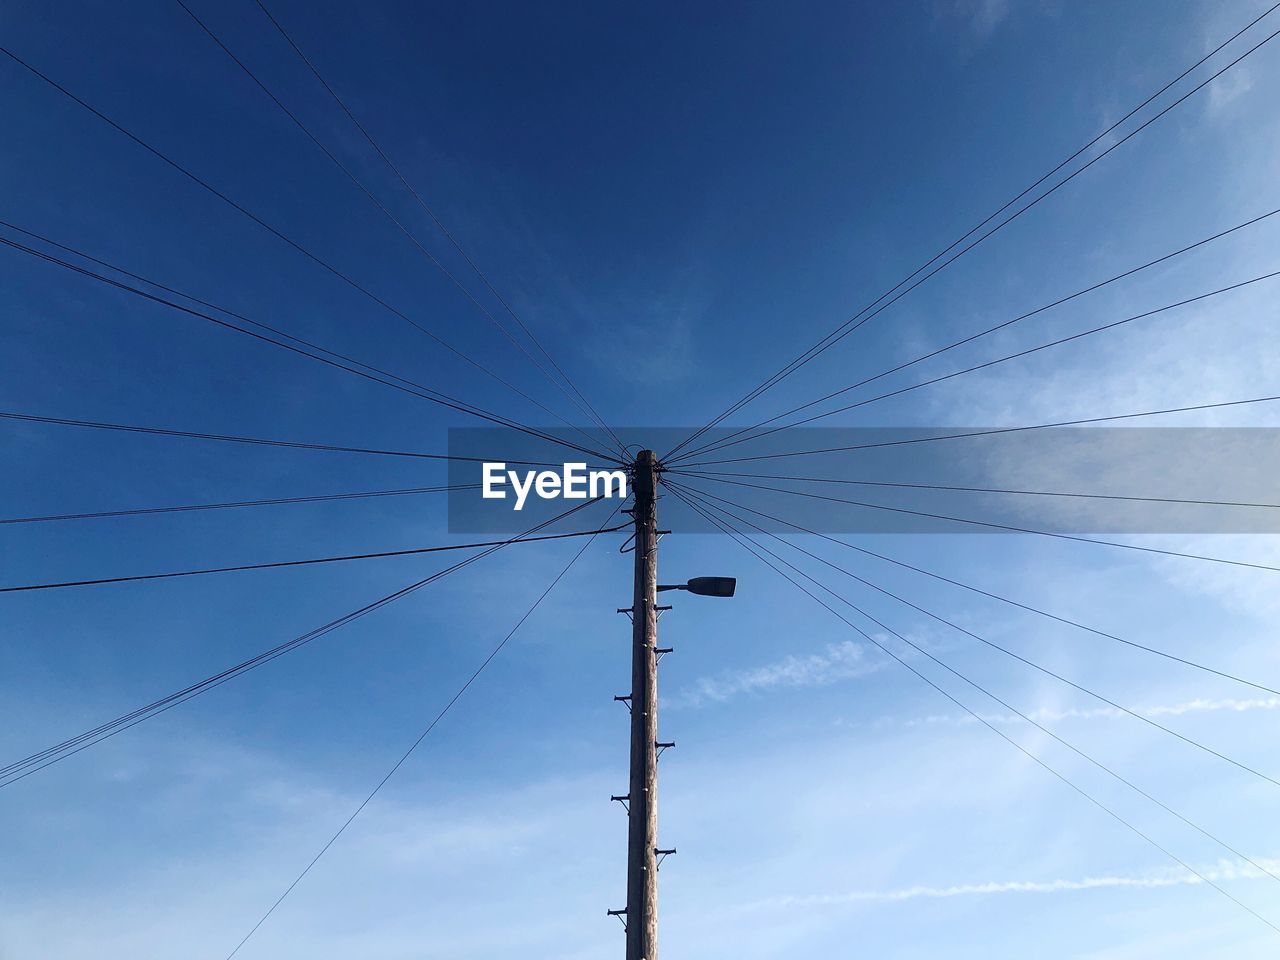 LOW ANGLE VIEW OF POWER LINES AGAINST BLUE SKY